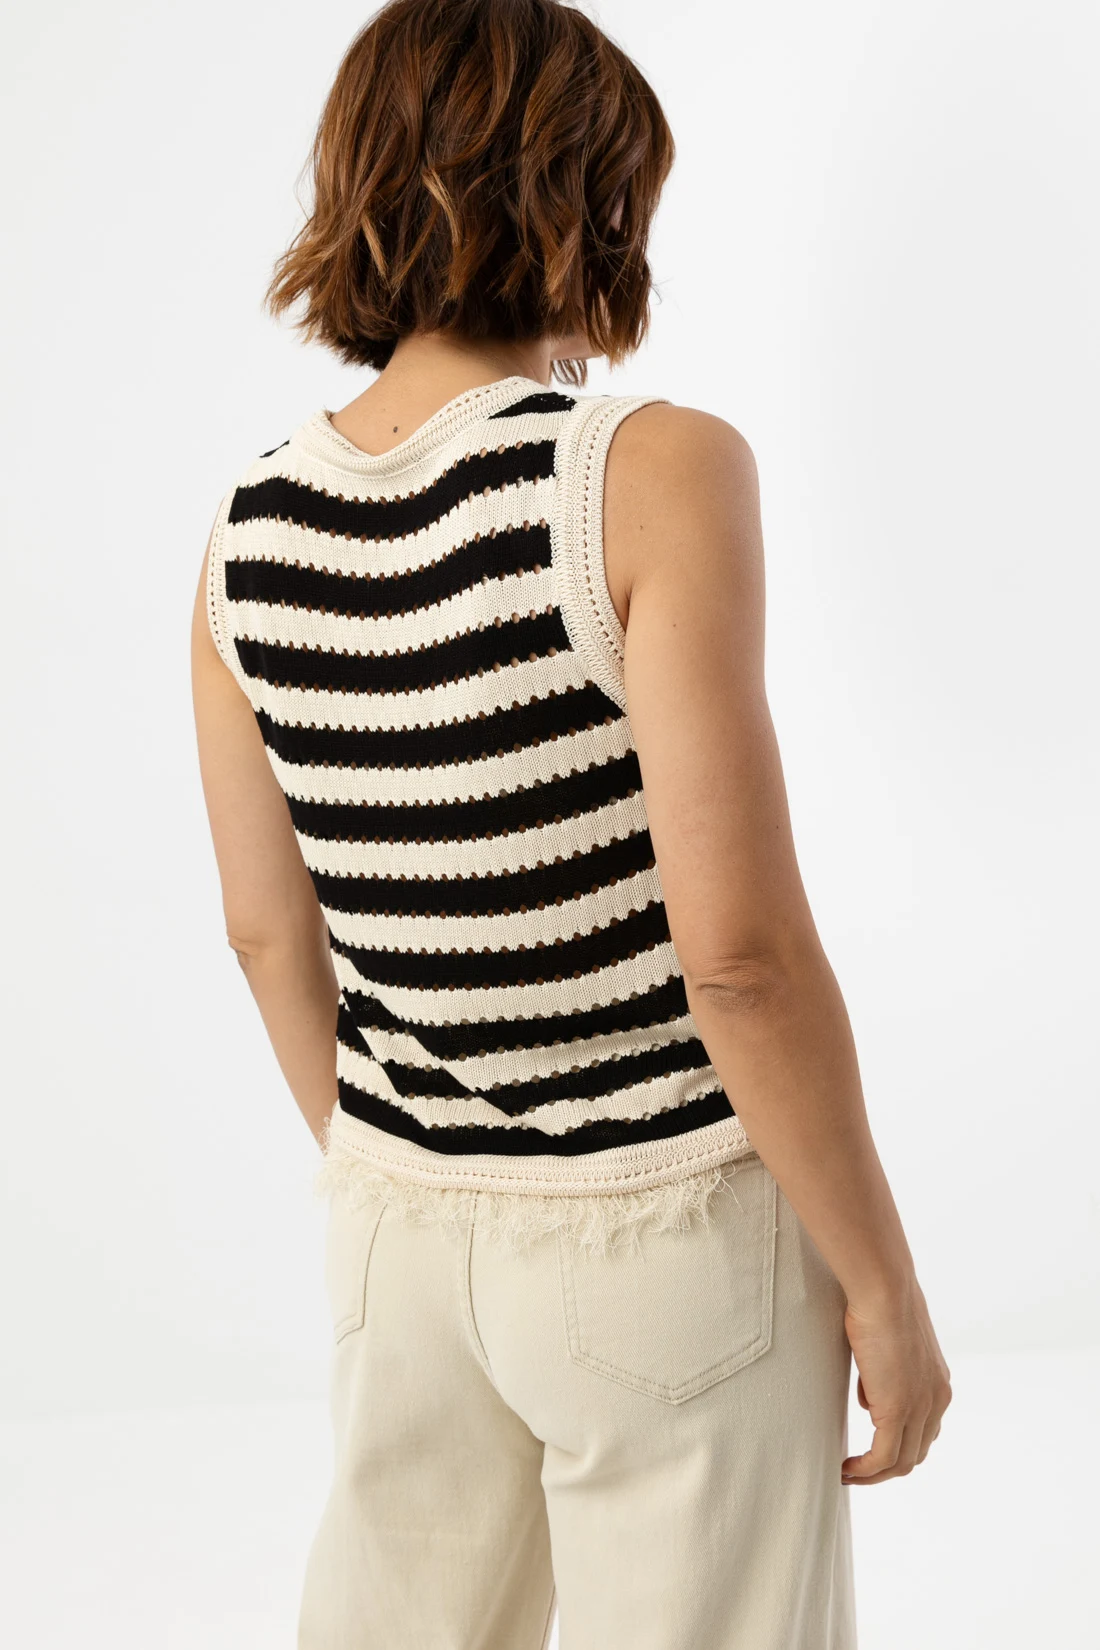 KNITTED TOP NUCRES - APRICOT